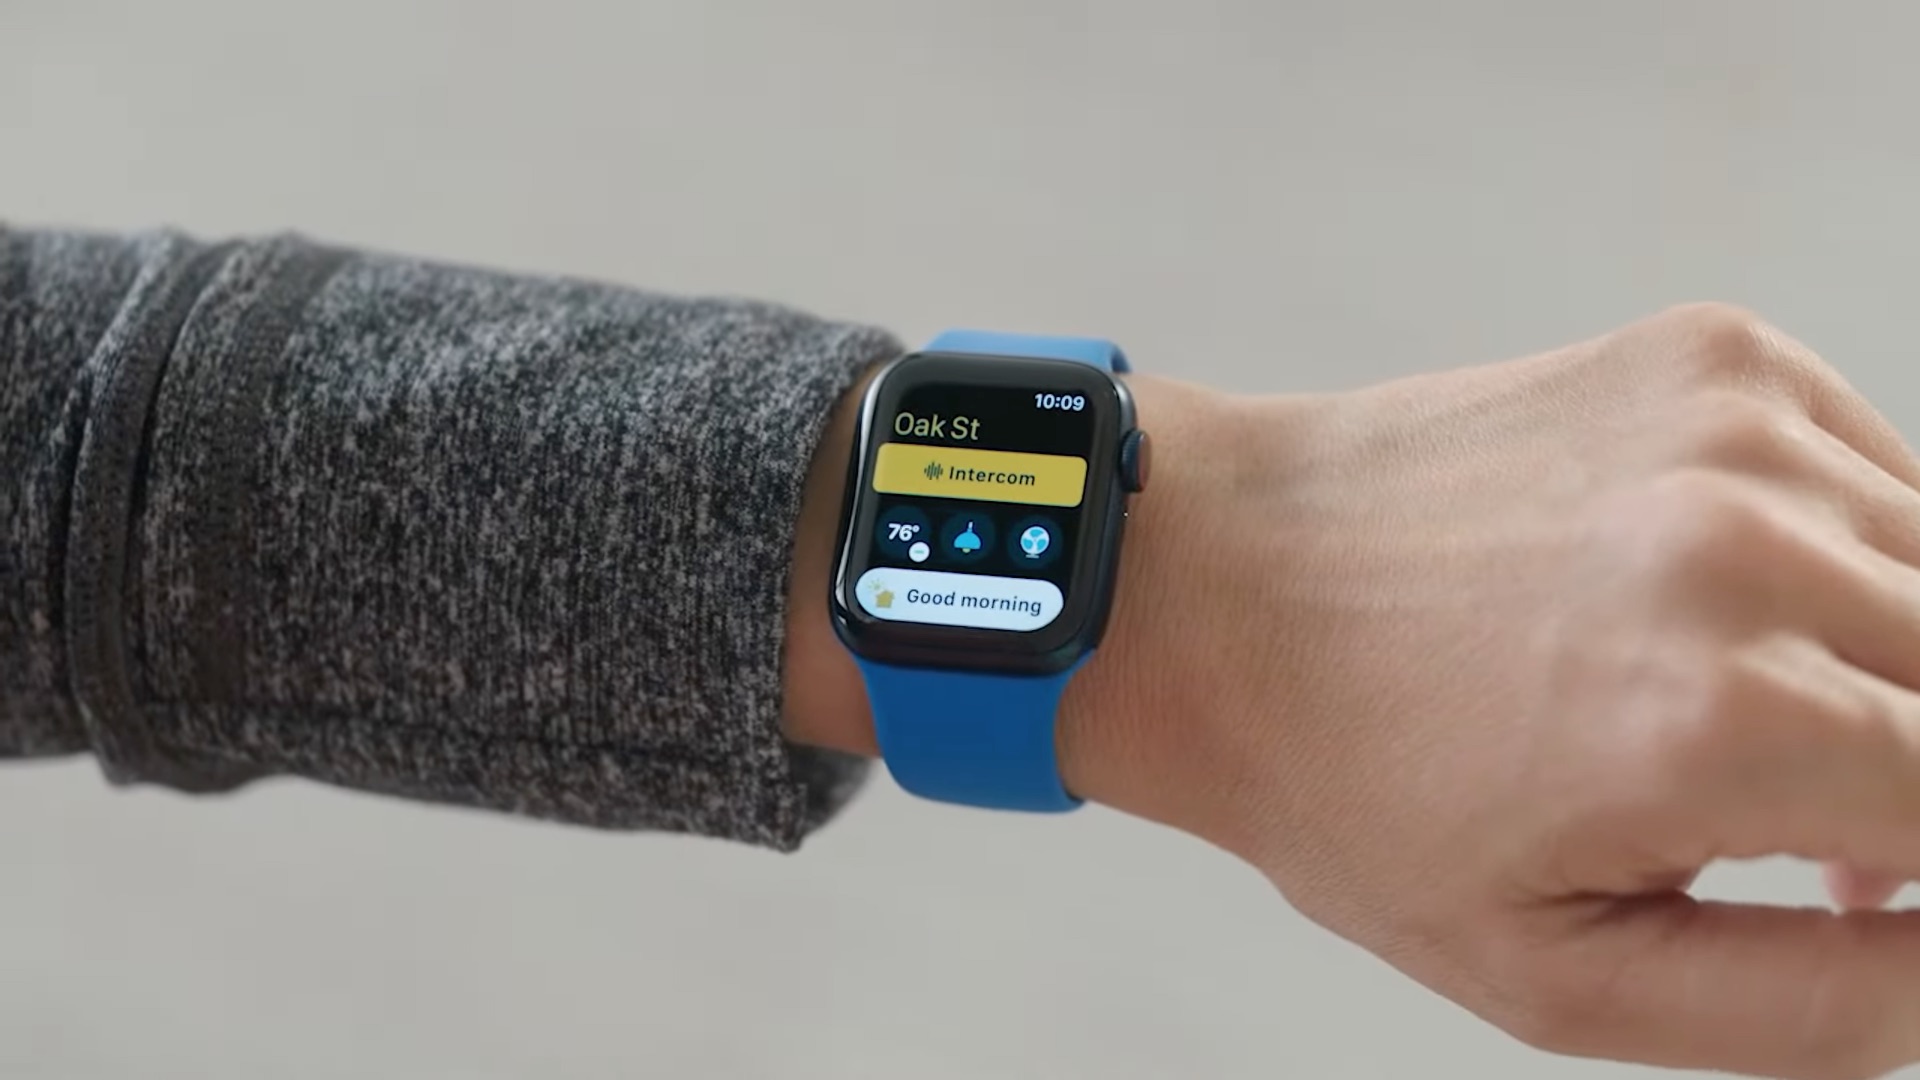 A photo showing a wrist wearing an Apple Watch running watchOS 8, with the Intercom button shown in the redesigned Home app